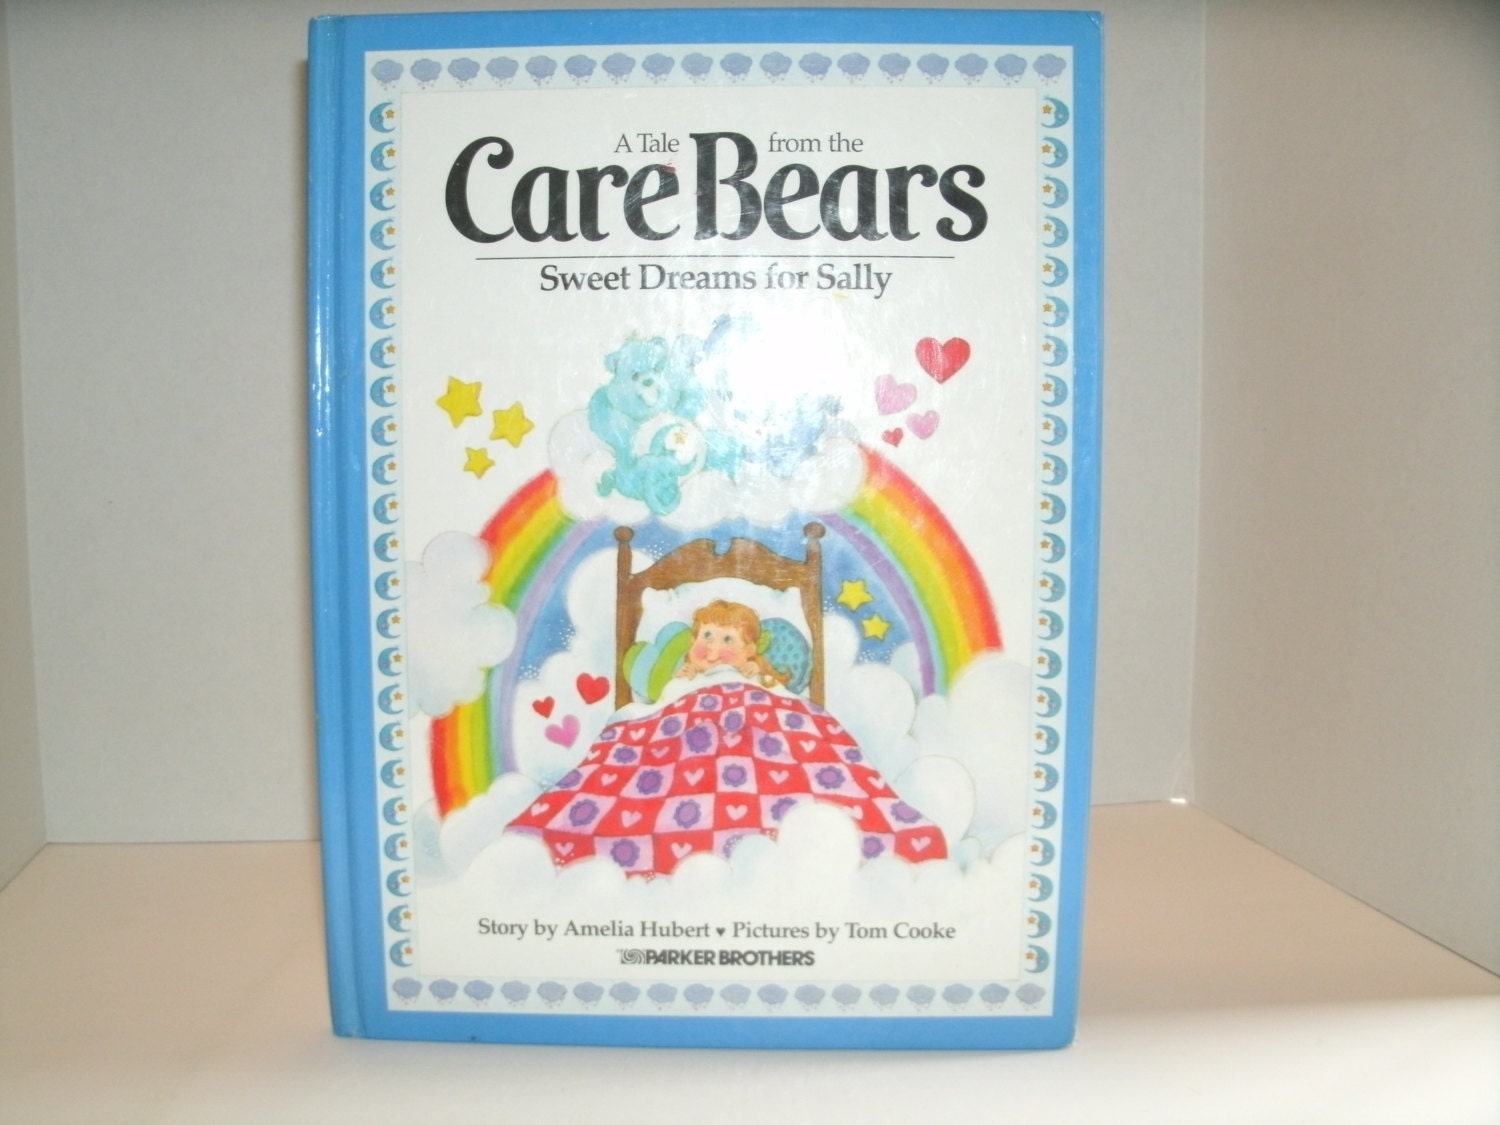 Vintage Care Bears Book Sweet Dreams for Sally 1980s